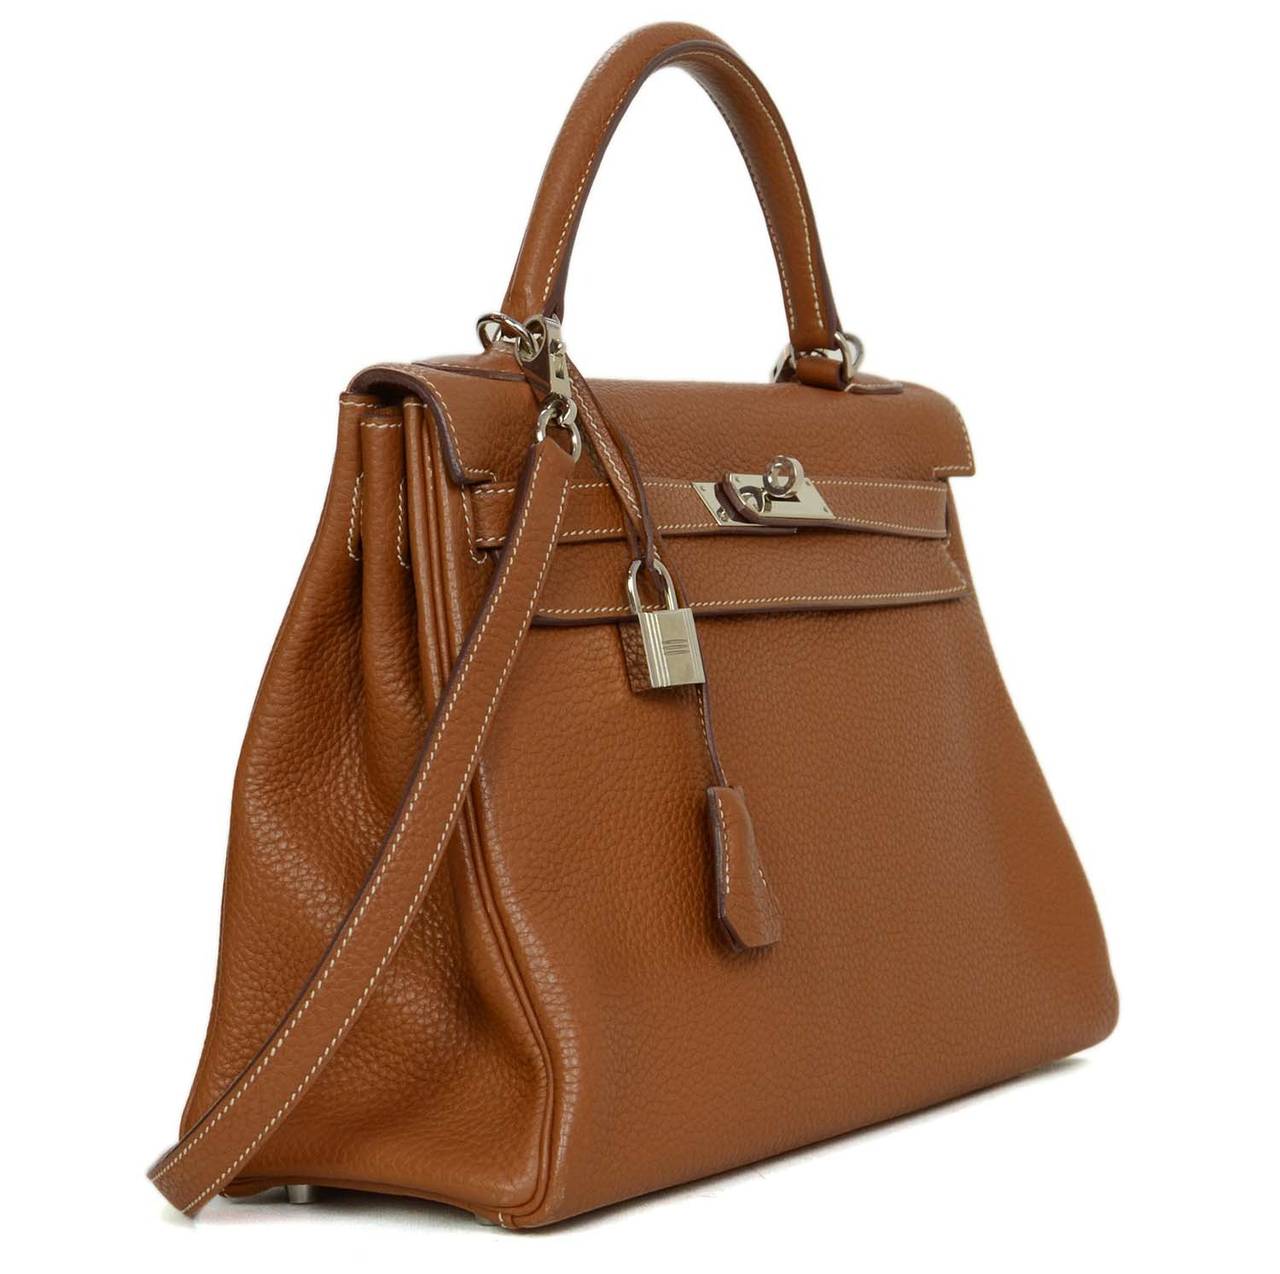 Hermes 2011 Gold Clemence Leather Kelly Bag 32 cm
Features souple clemence leather for more movement and a softer appearance to the bag

    Made in: France
    Year of Production: 2011
    Color: Golden brown, palladium, and white contrast